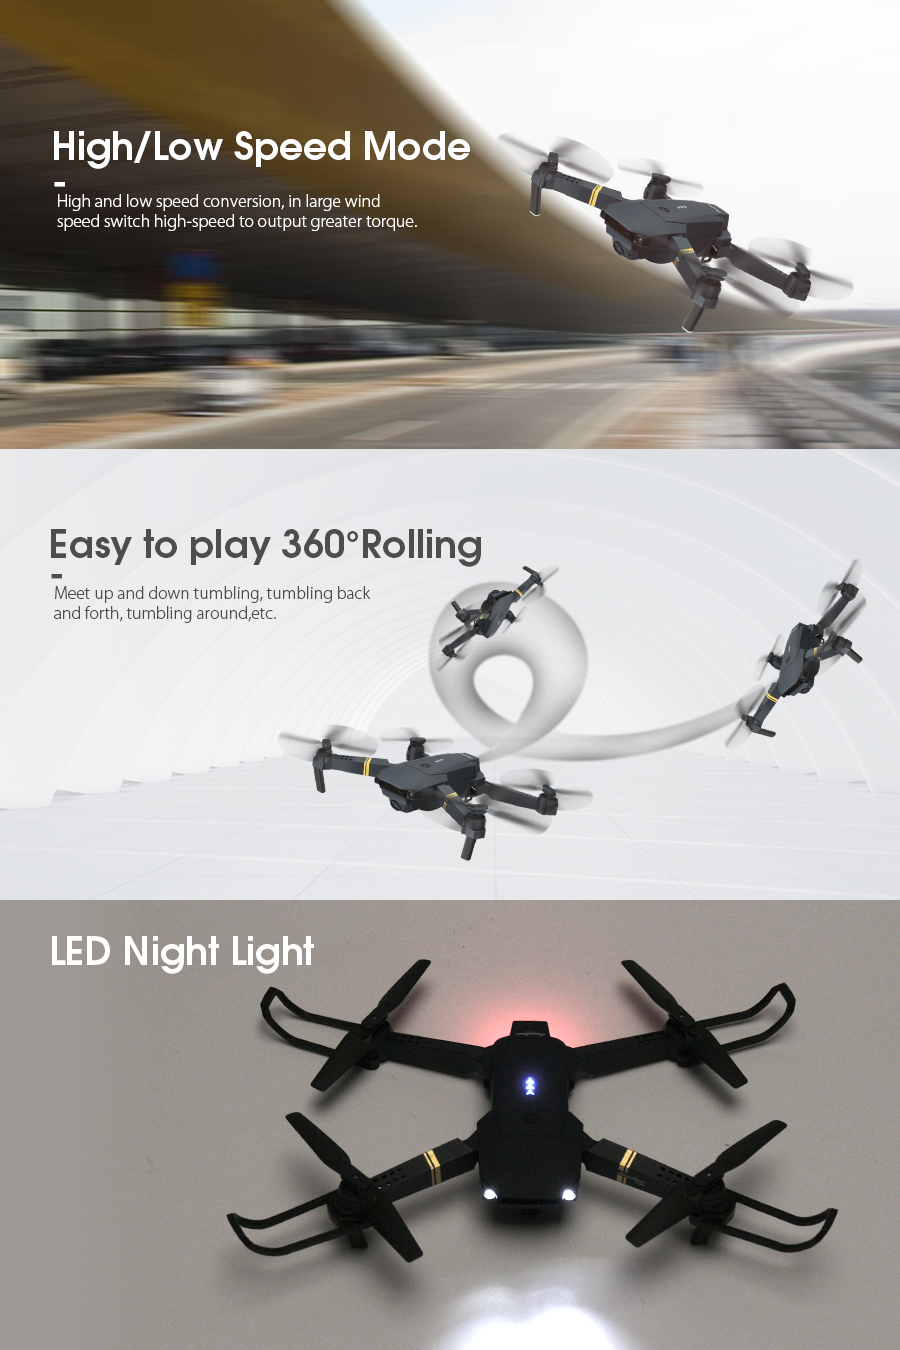 Eachine-E58-WIFI-FPV-With-720P1080P-HD-Wide-Angle-Camera-High-Hold-Mode-Foldable-RC-Drone-Quadcopter-1212232-8